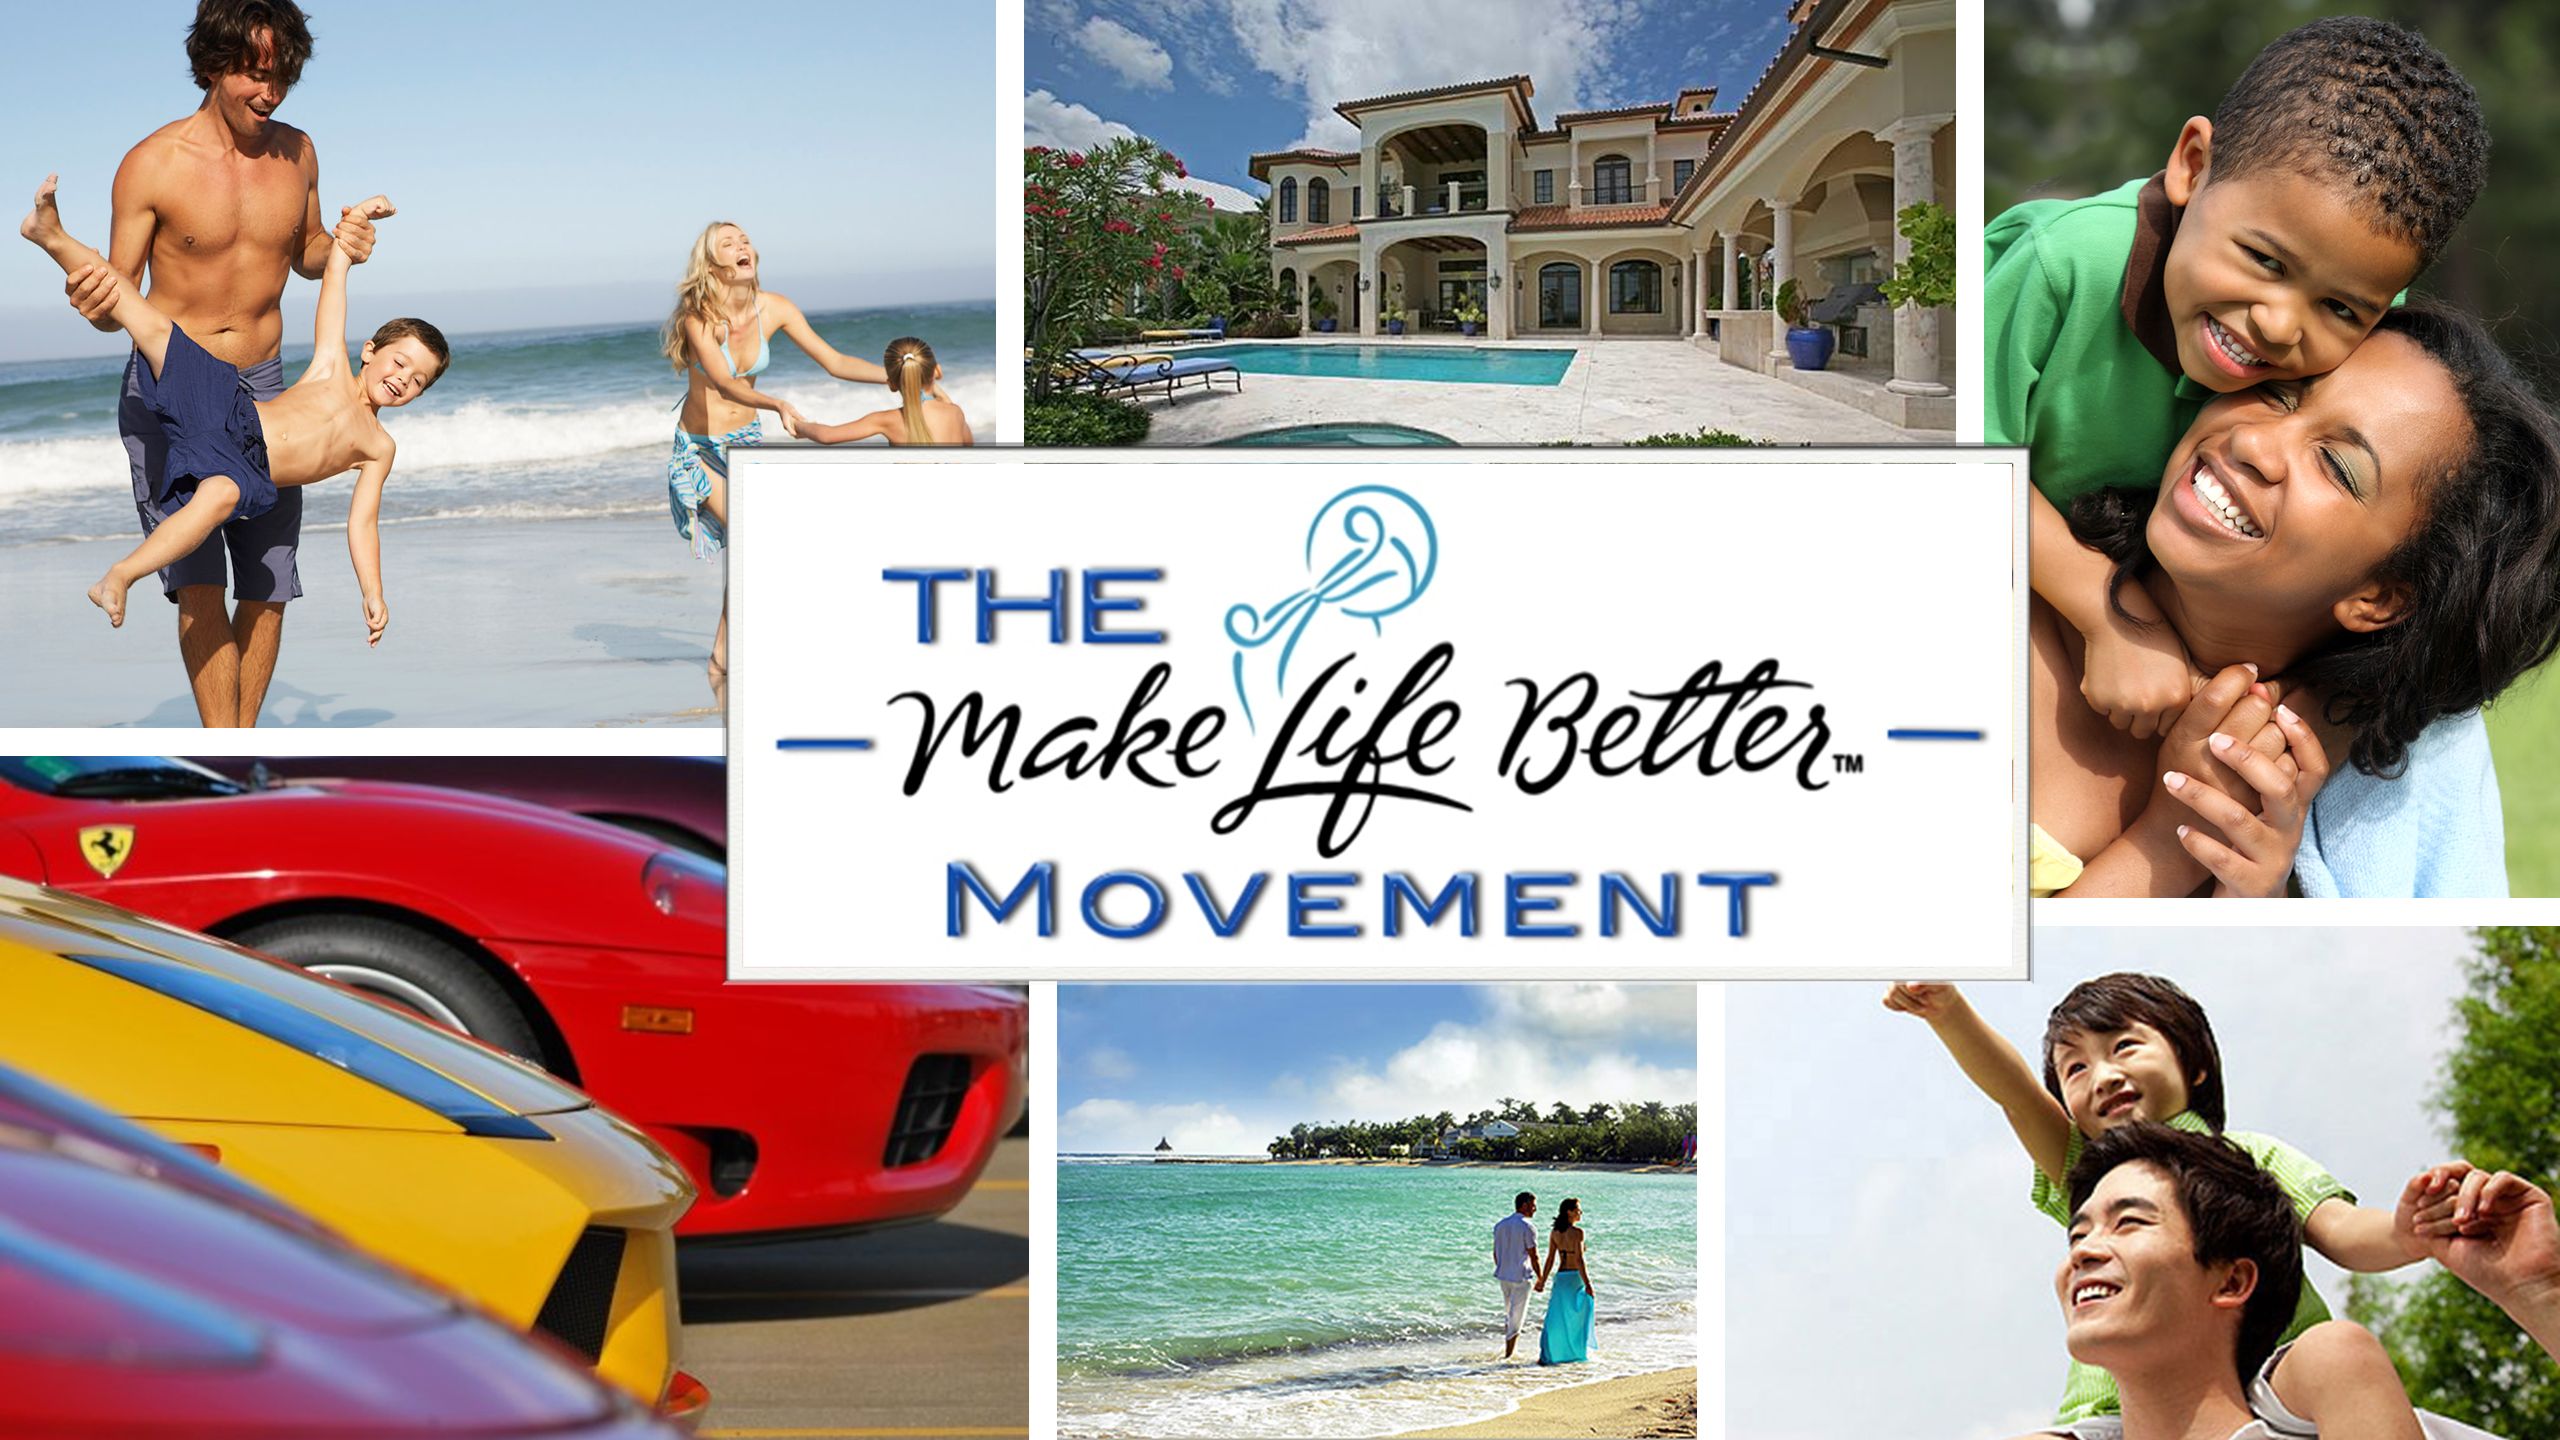 They made for life. Movement is Life. Start a Movement.